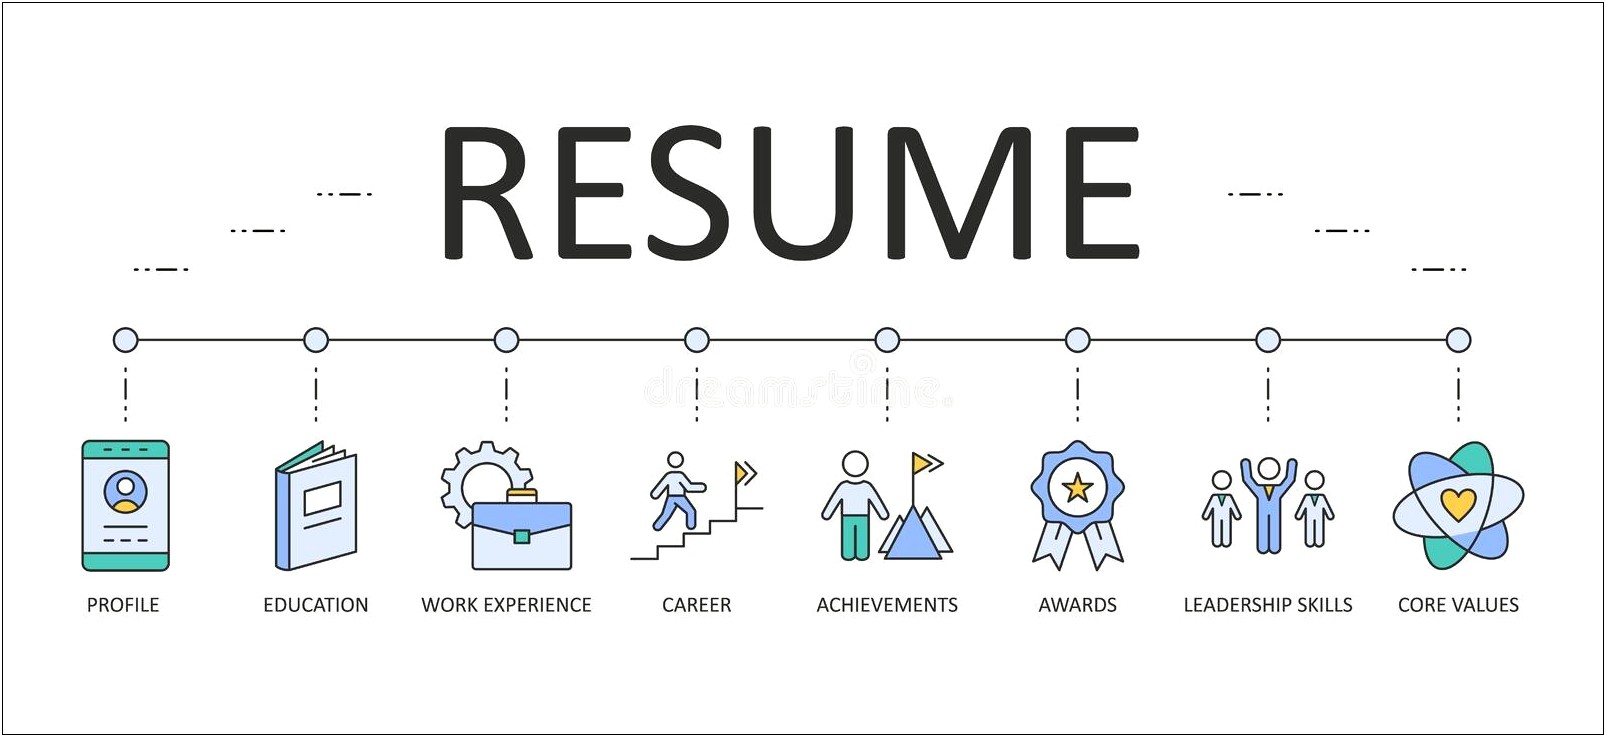 Resume Start With Experience Or Education